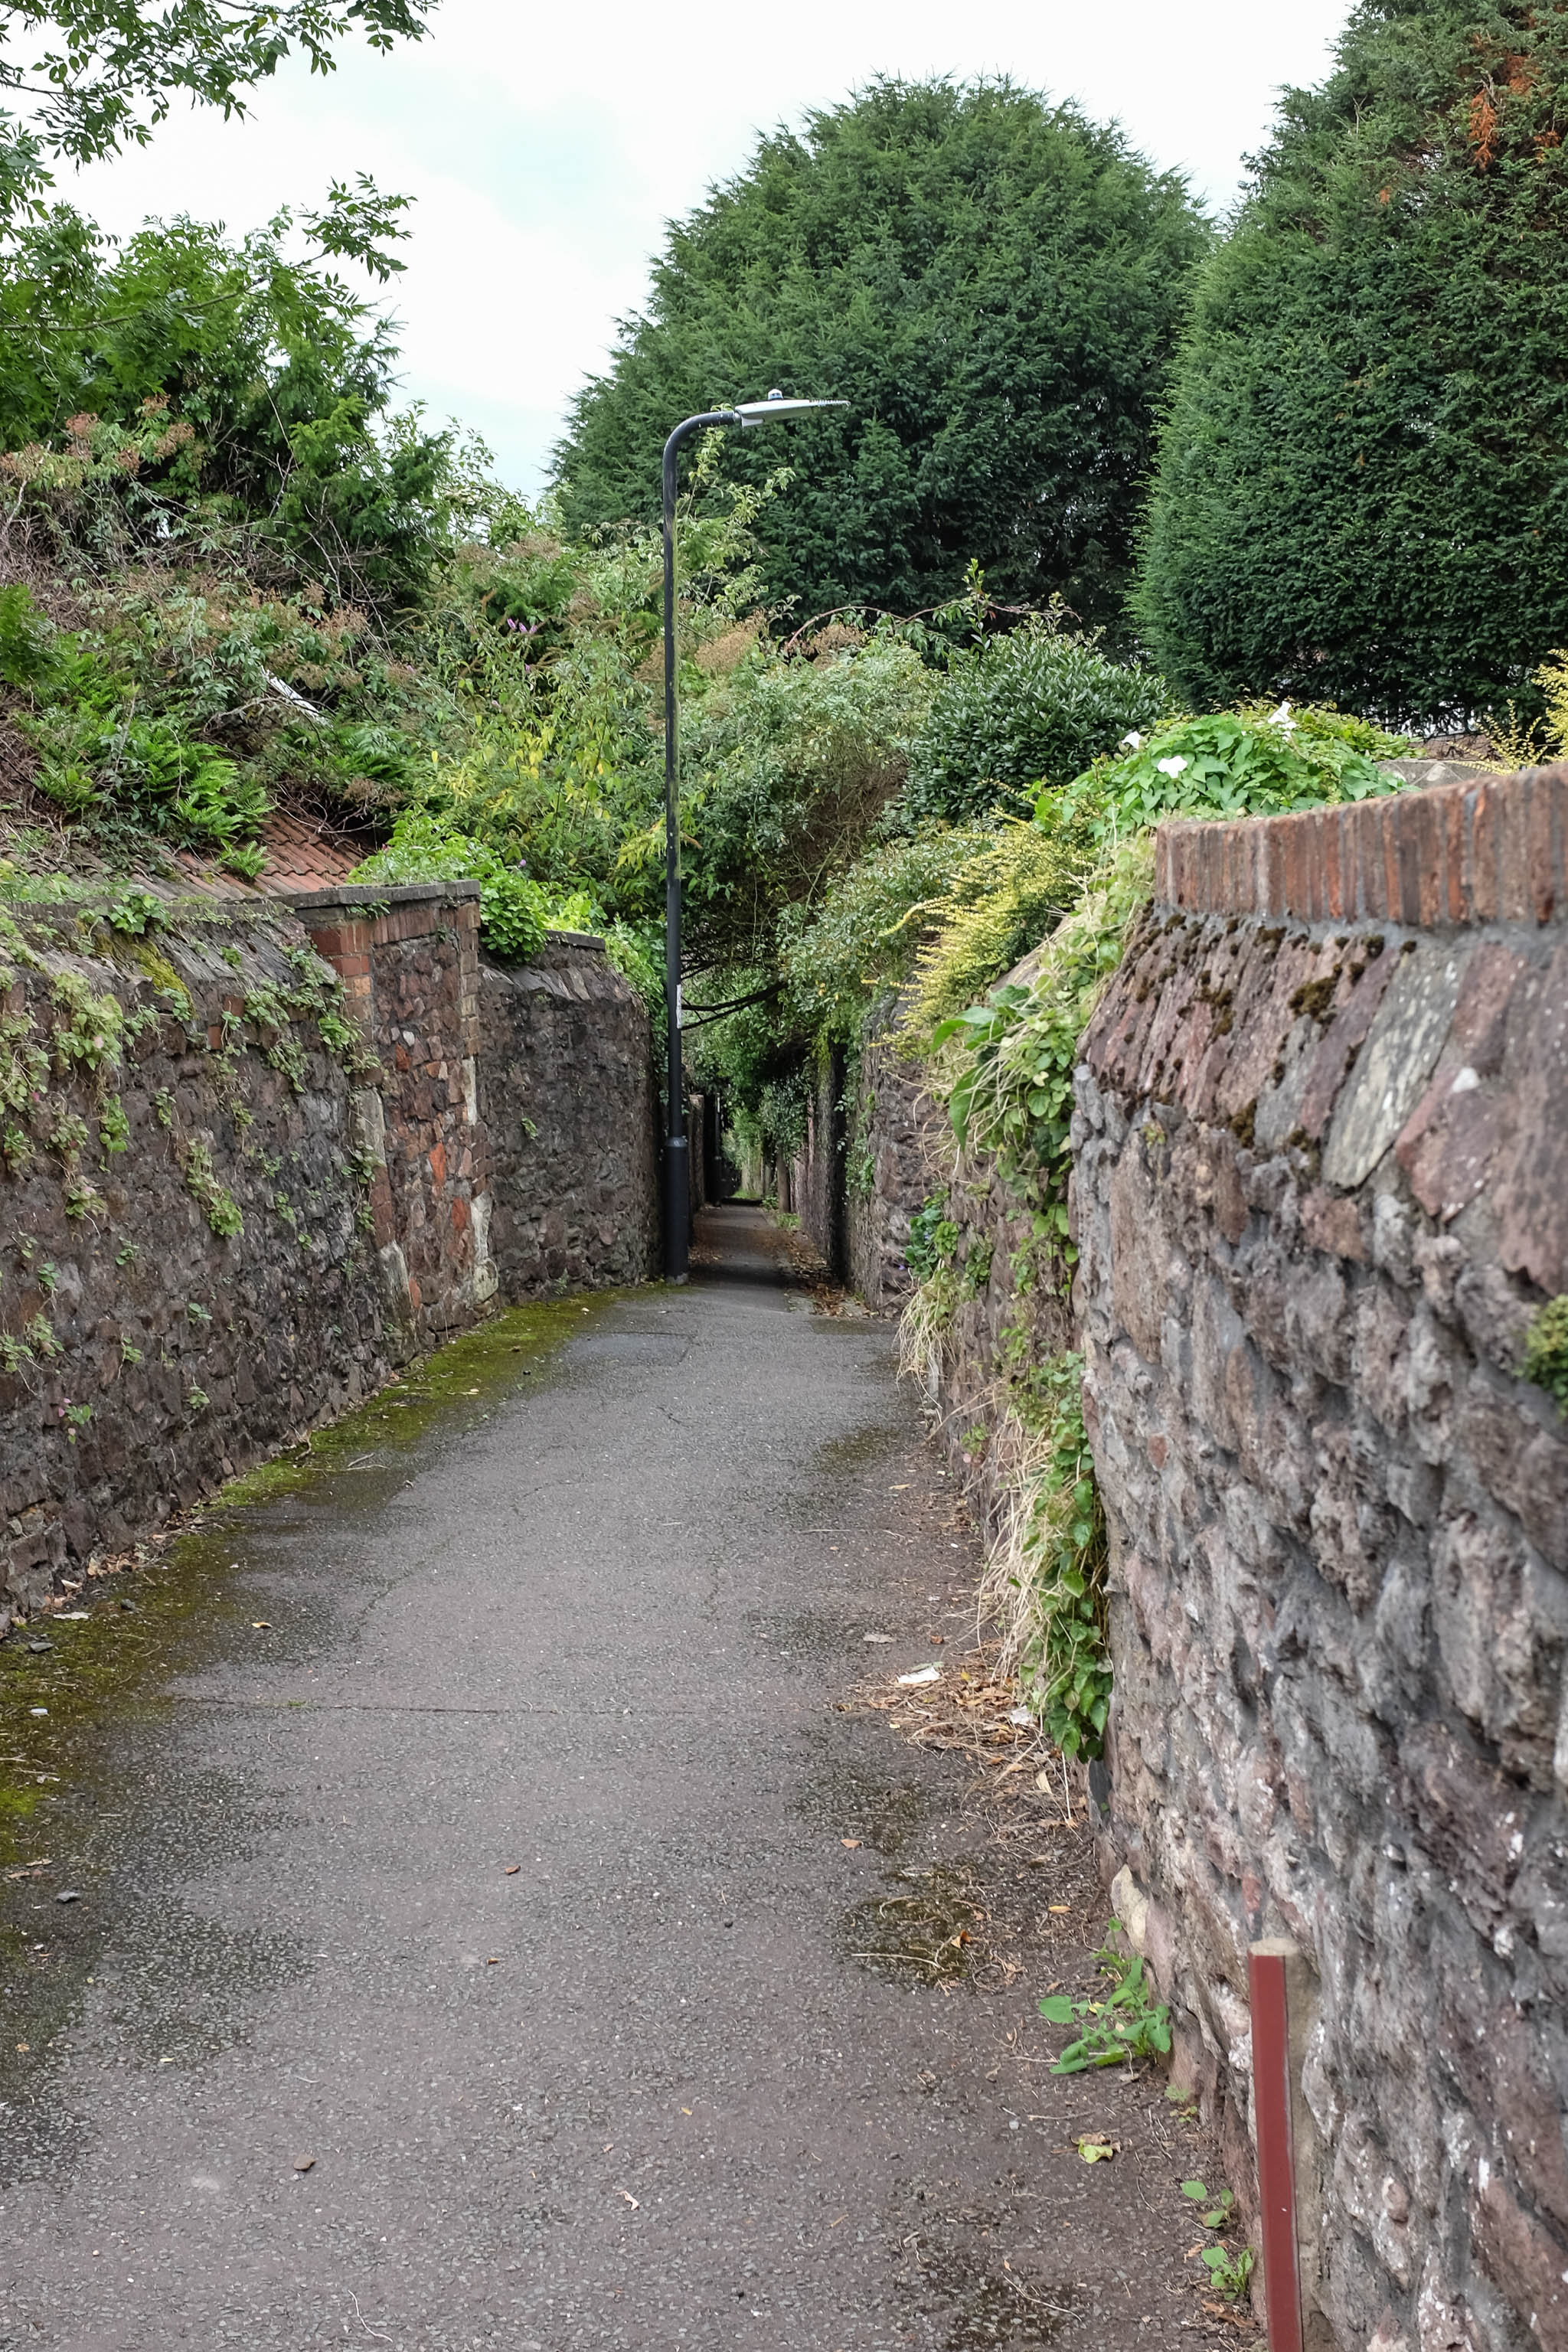 Hinton Lane
My exercise for the day is to be a short sharp shock: first we descend down Hinton Lane to the Hotwell Road, then I'm going to ascend the Zig Zag,...